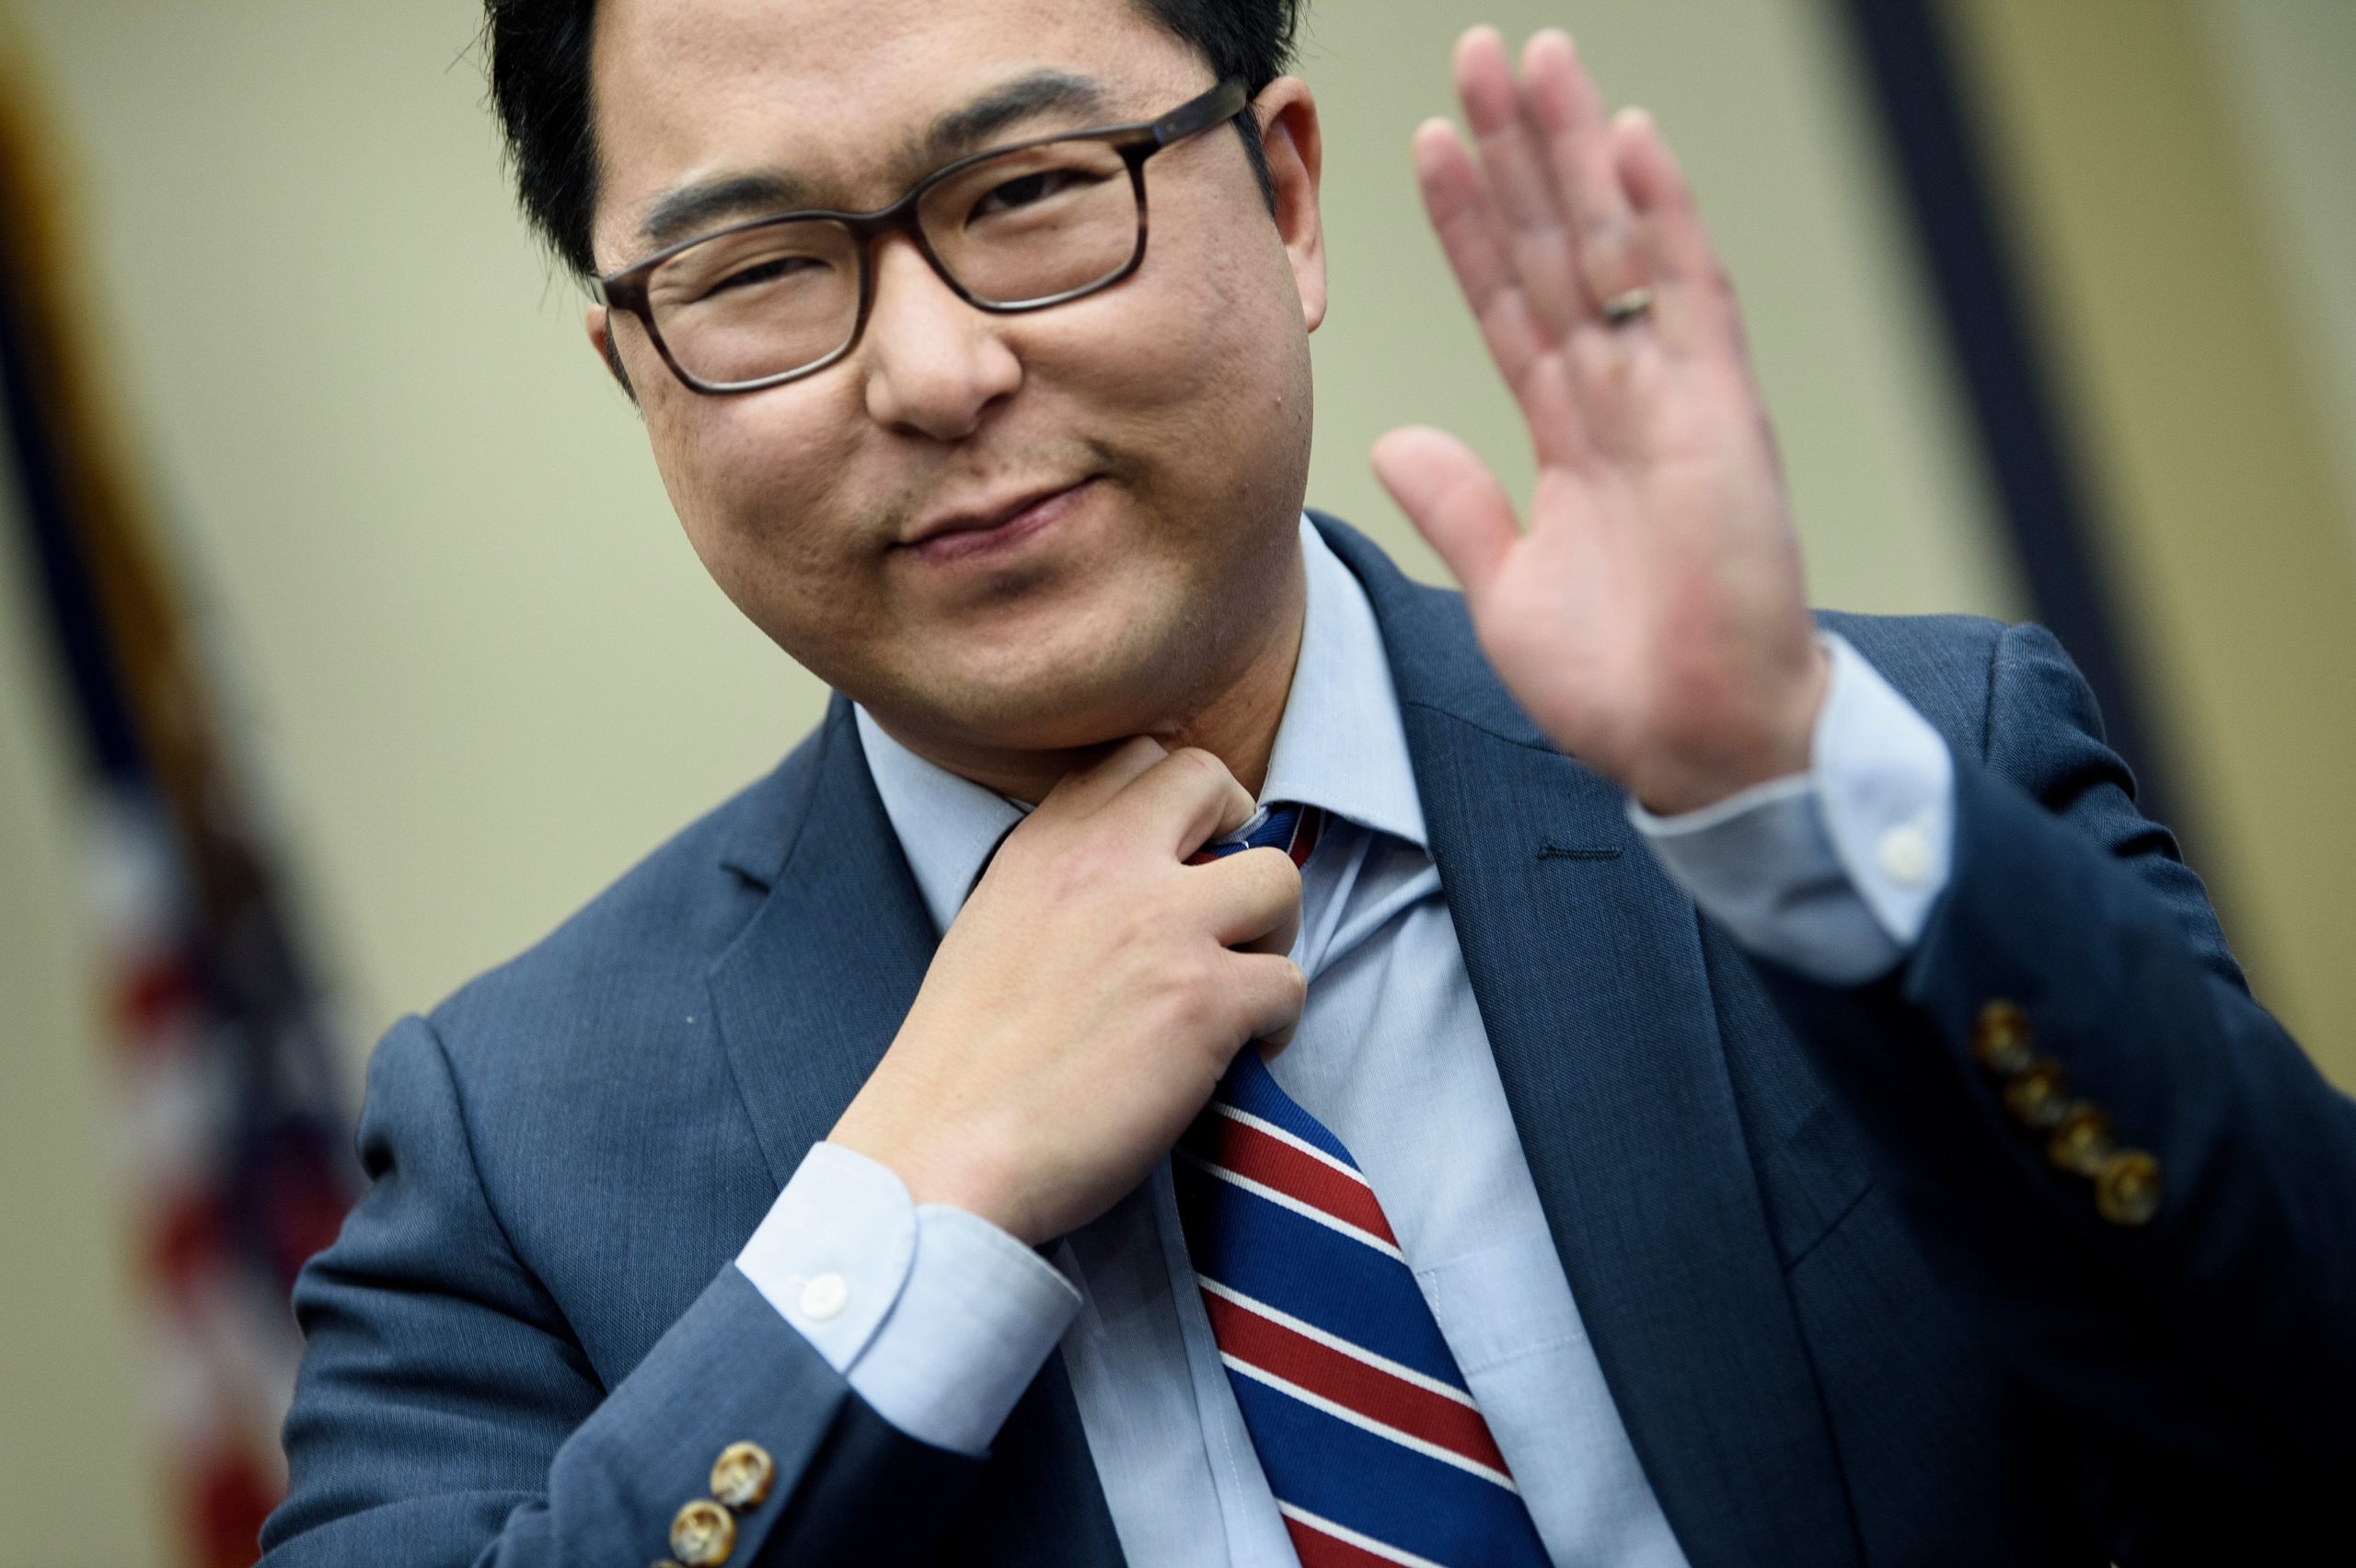 US Representative-elect Andy Kim (D-NJ) reacts after drawing a number during an office lottery for new members of Congress on Capitol Hill November 30, 2018 in Washington, DC. (Photo by Brendan Smialowski / AFP) (Photo credit should read BRENDAN SMIALOWSKI/AFP via Getty Images)